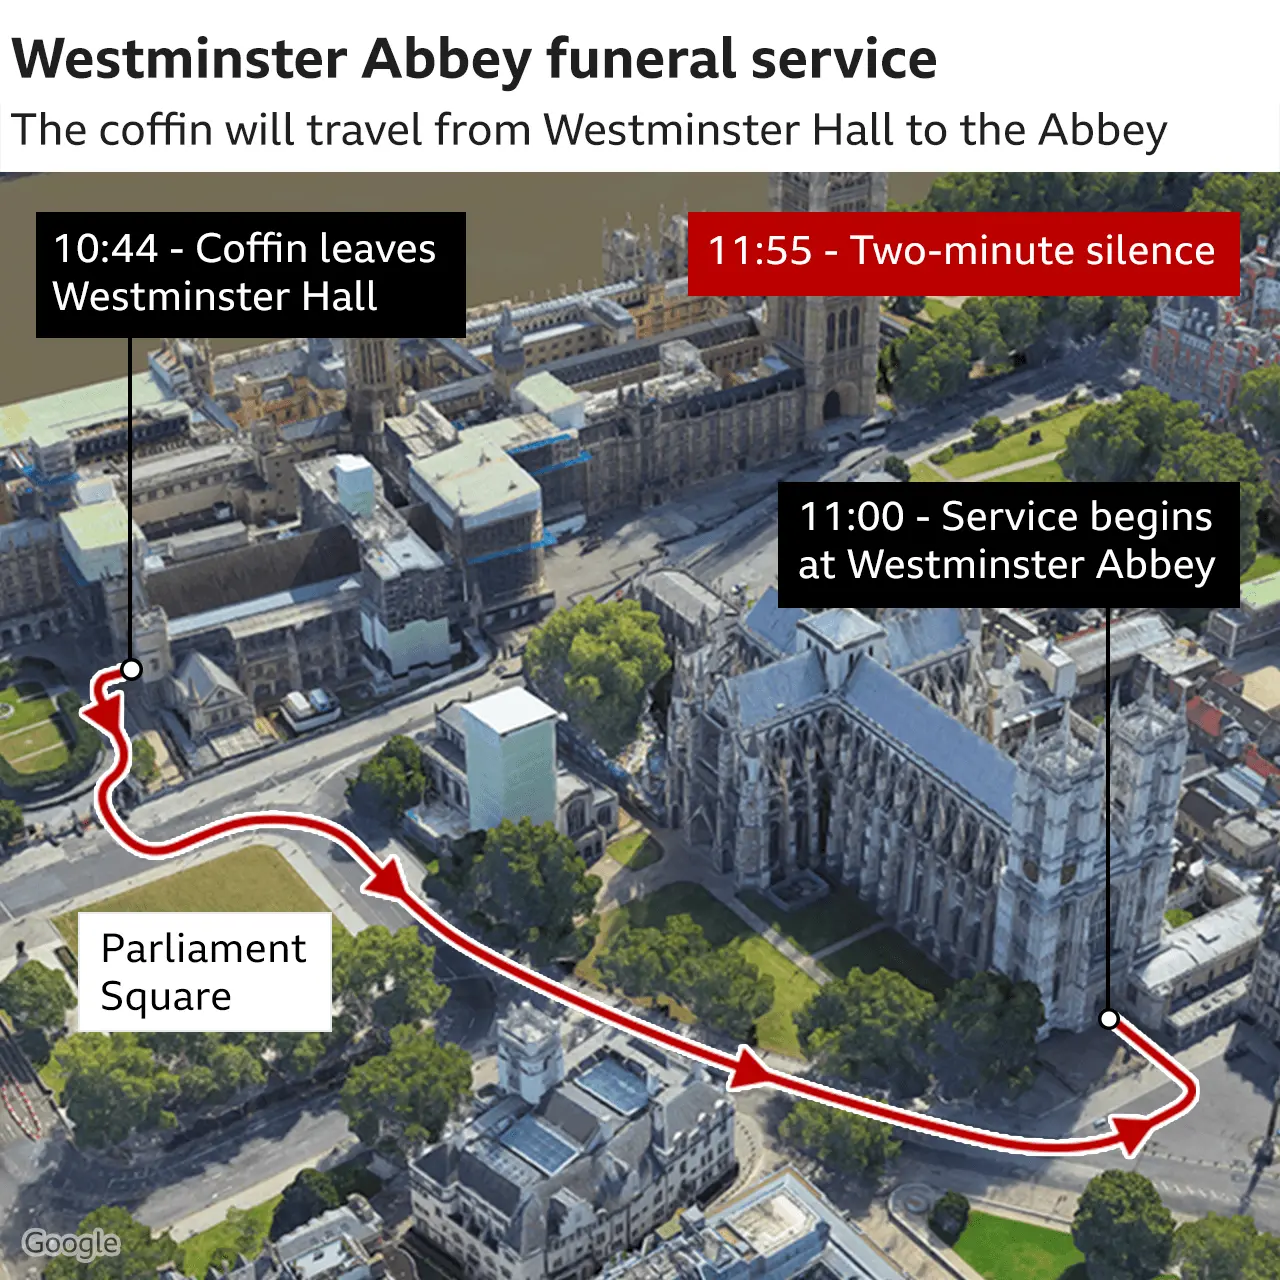 BBC News  Map showing the procession route from Westminster Hall to the Abbey